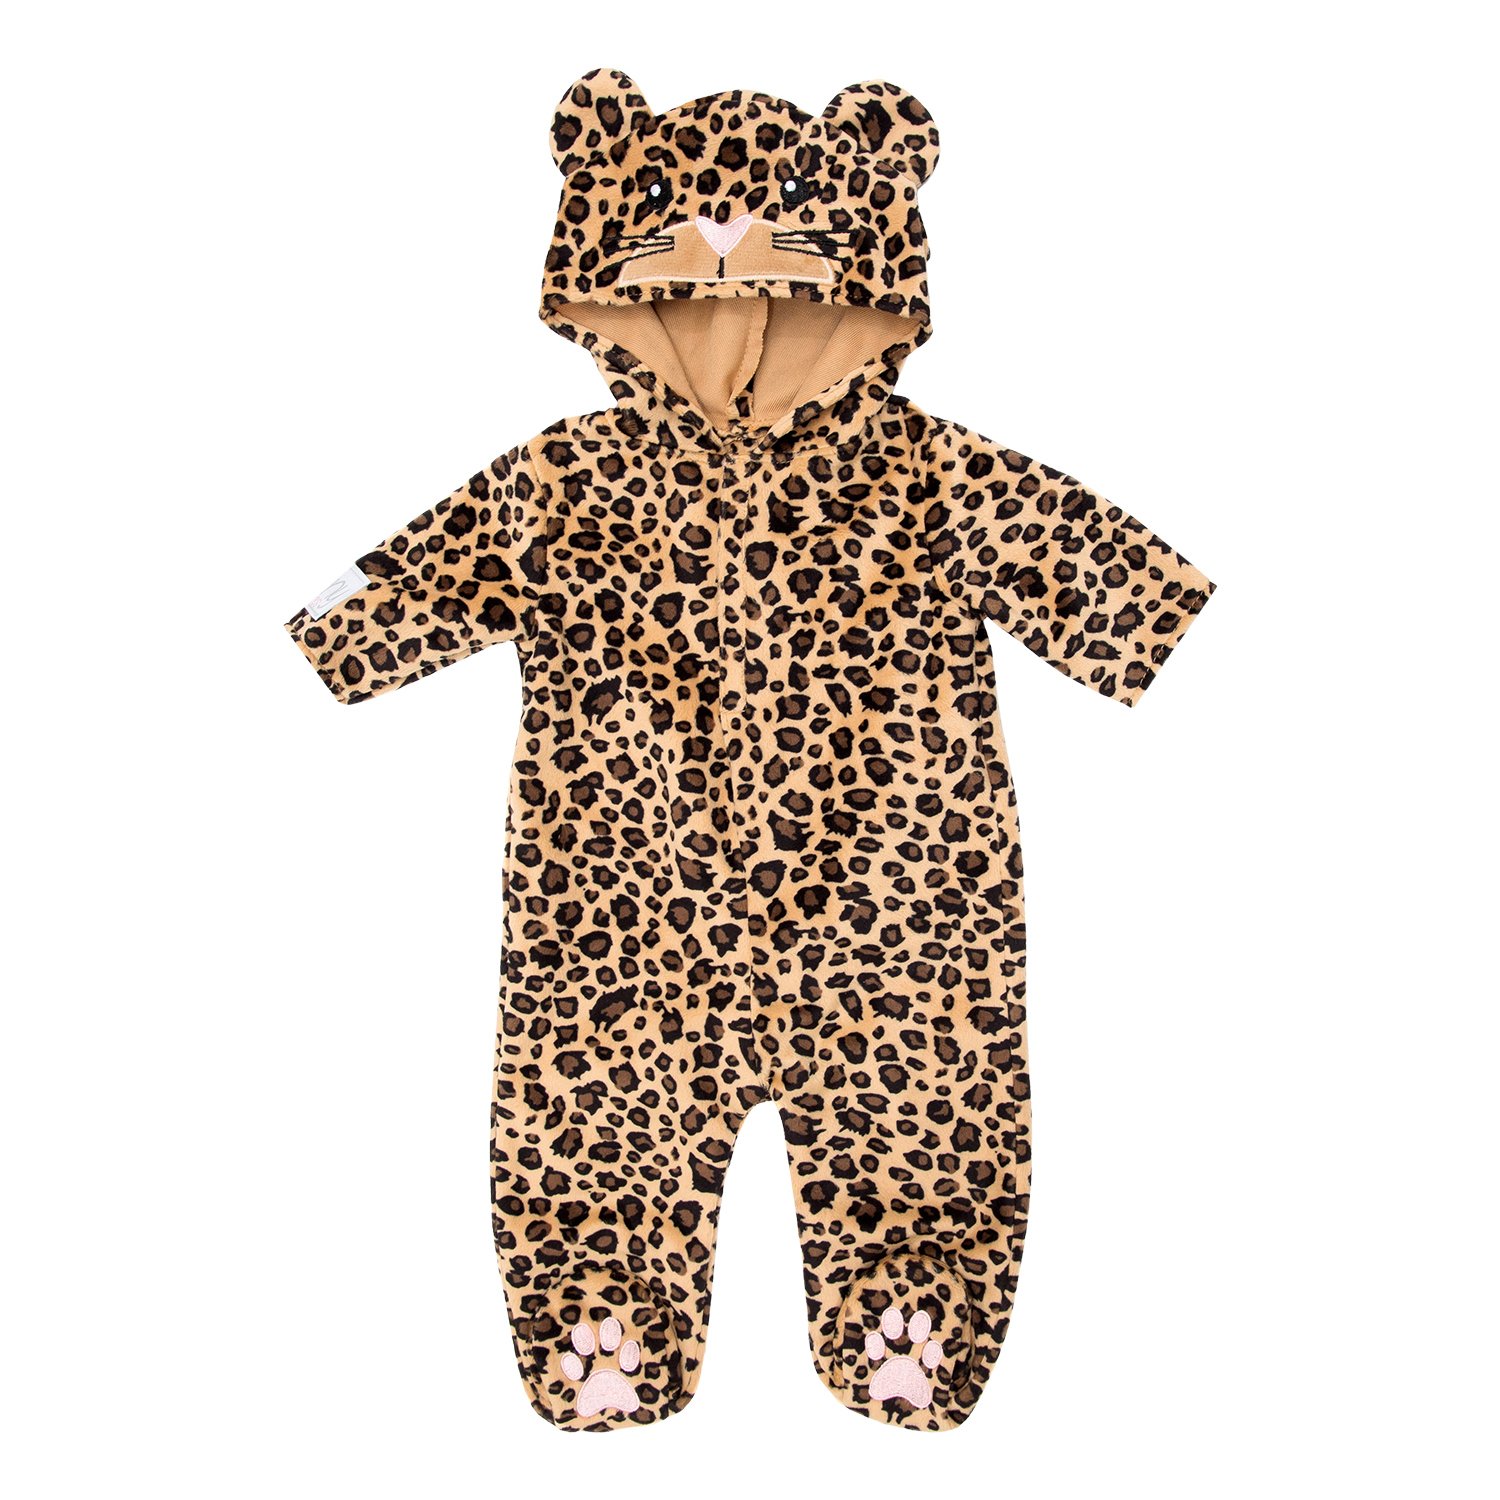 Chad Valley Tiny Treasures Leopard Outfit